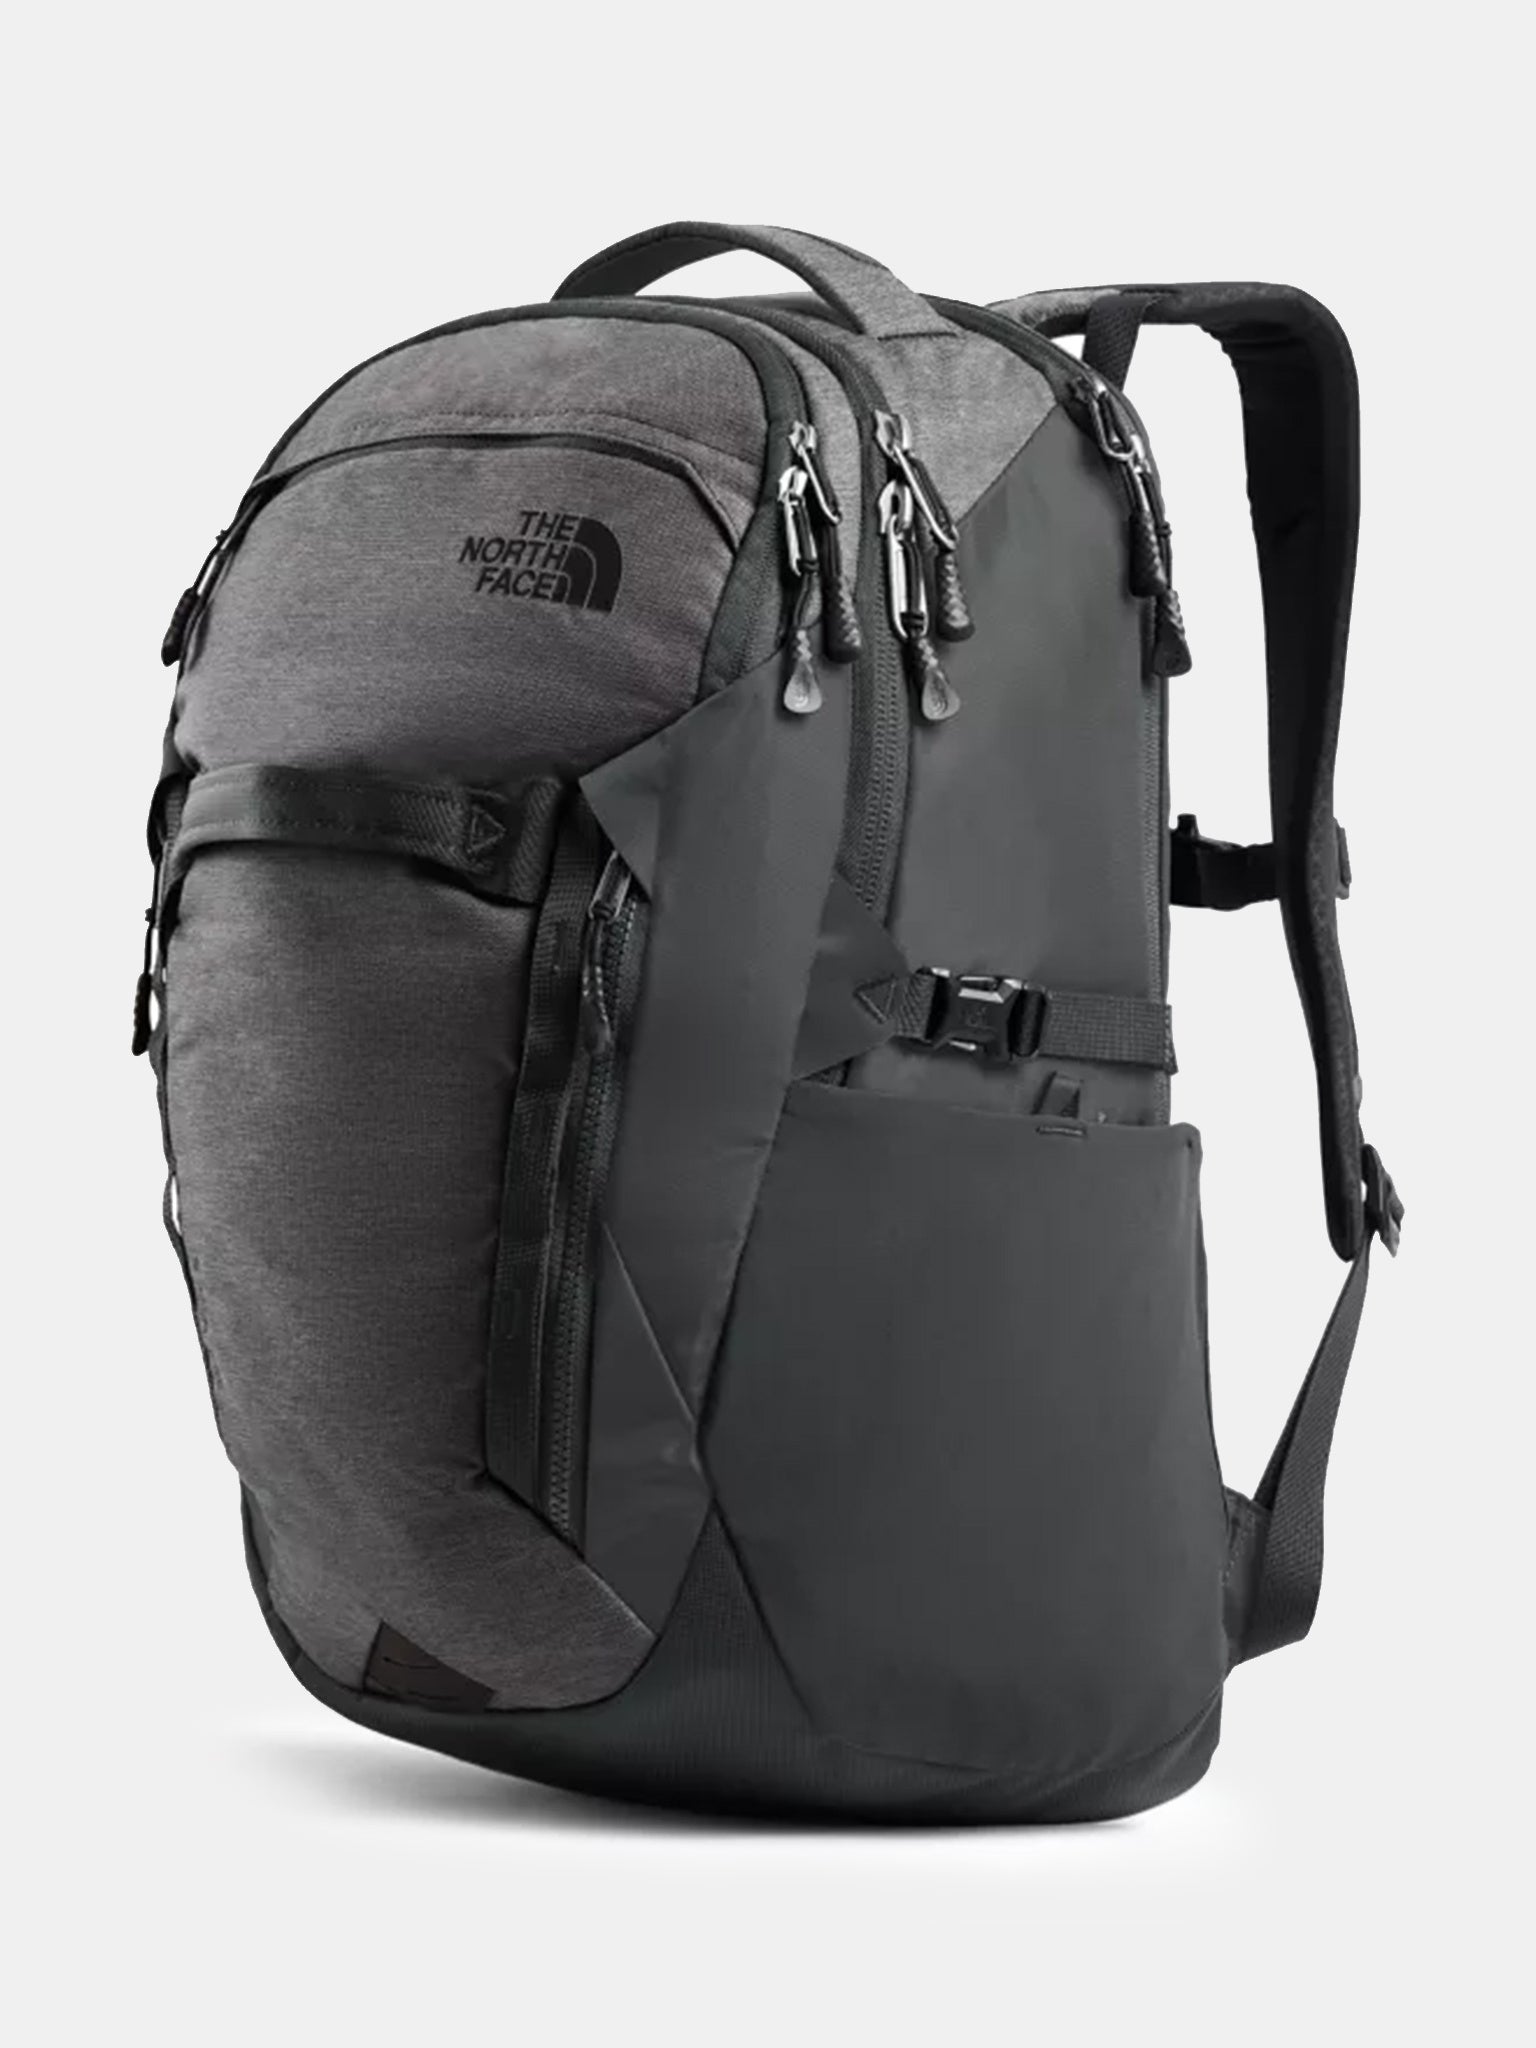 The North Face Surge Backpack –